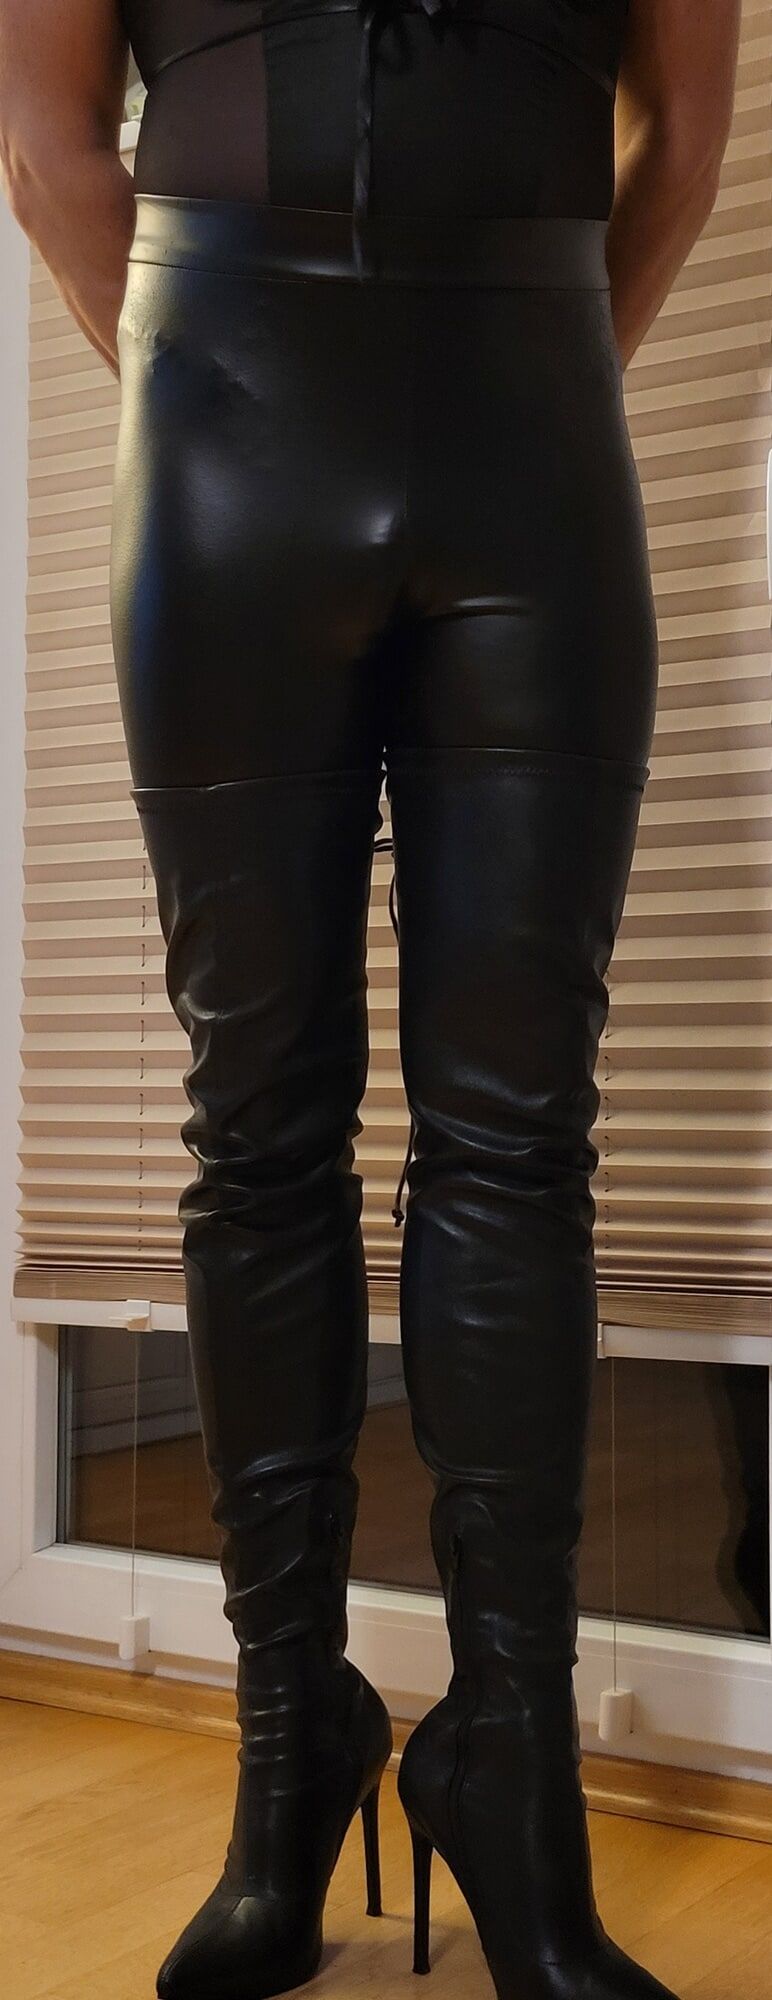 Me in Shiny Leggins and Overknee Boots  #2